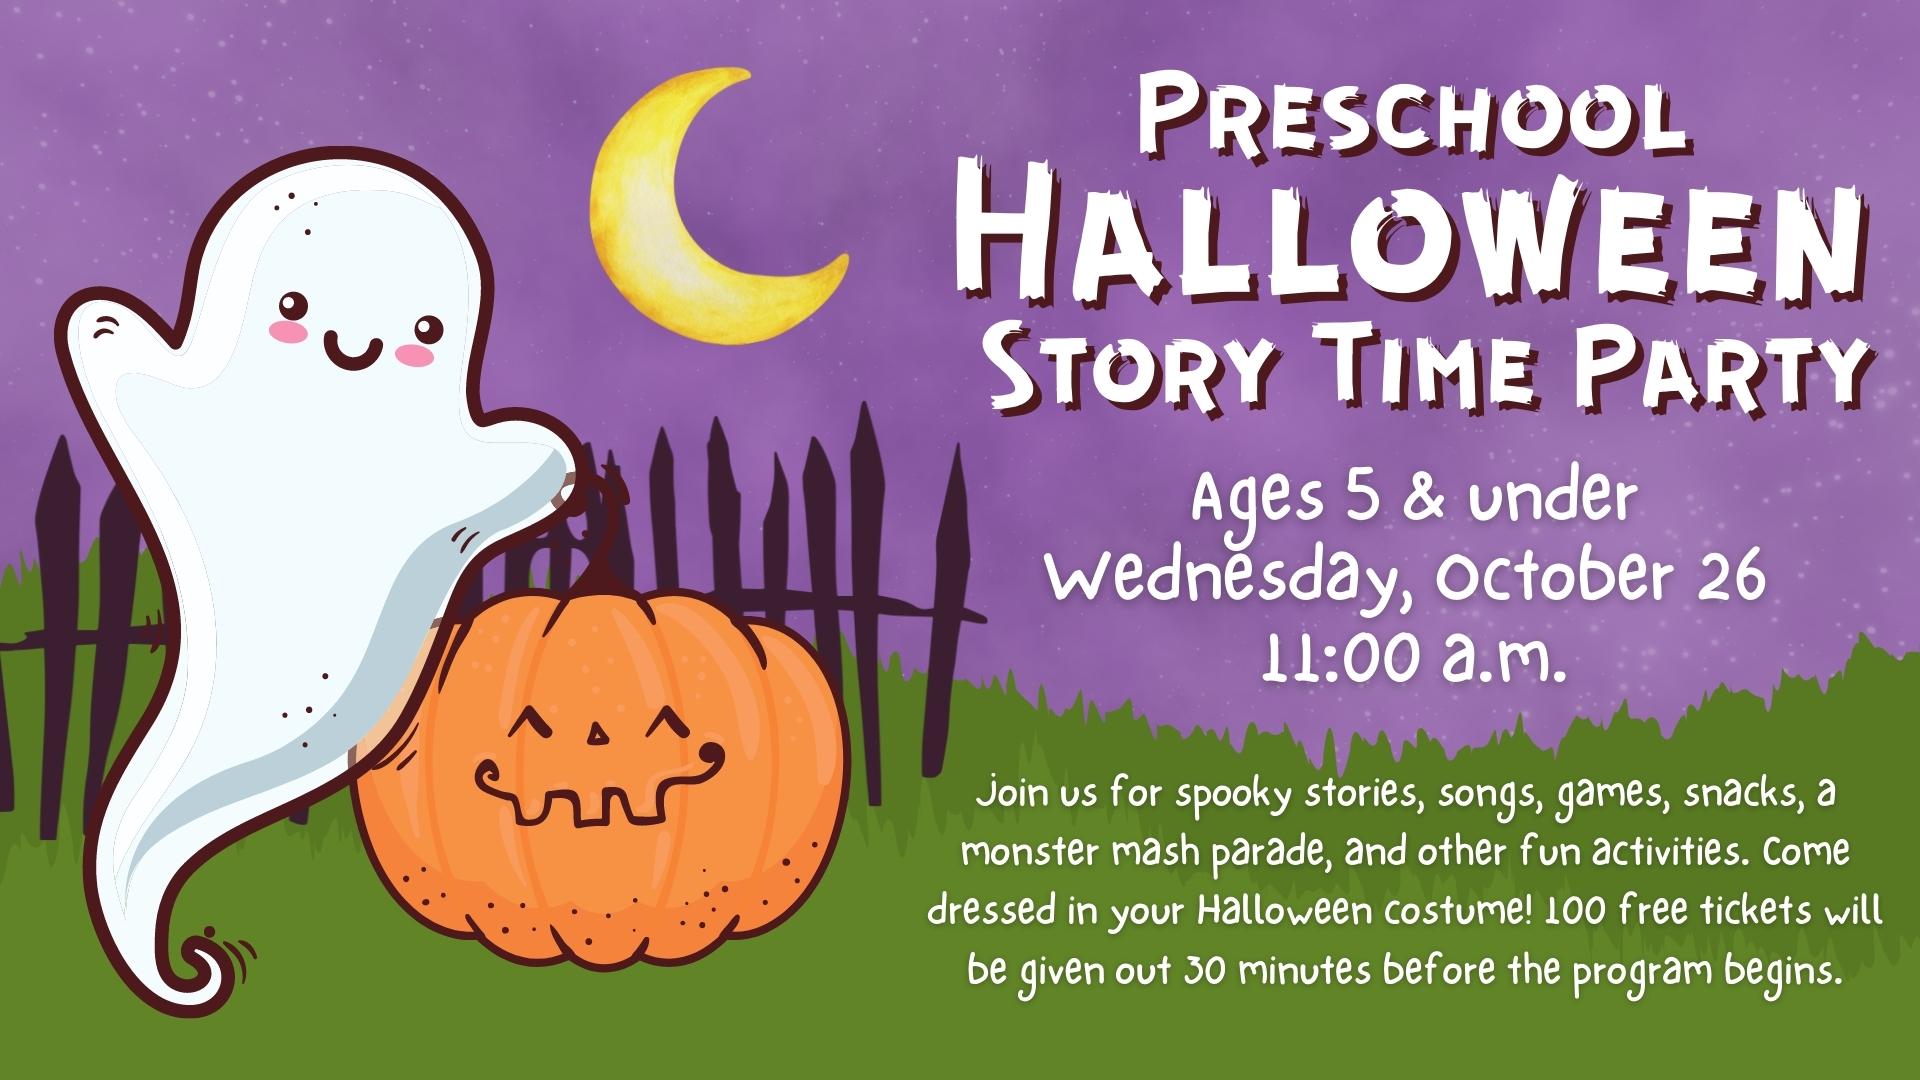 Preschool Halloween Story Time Party | Safety Harbor Public Library